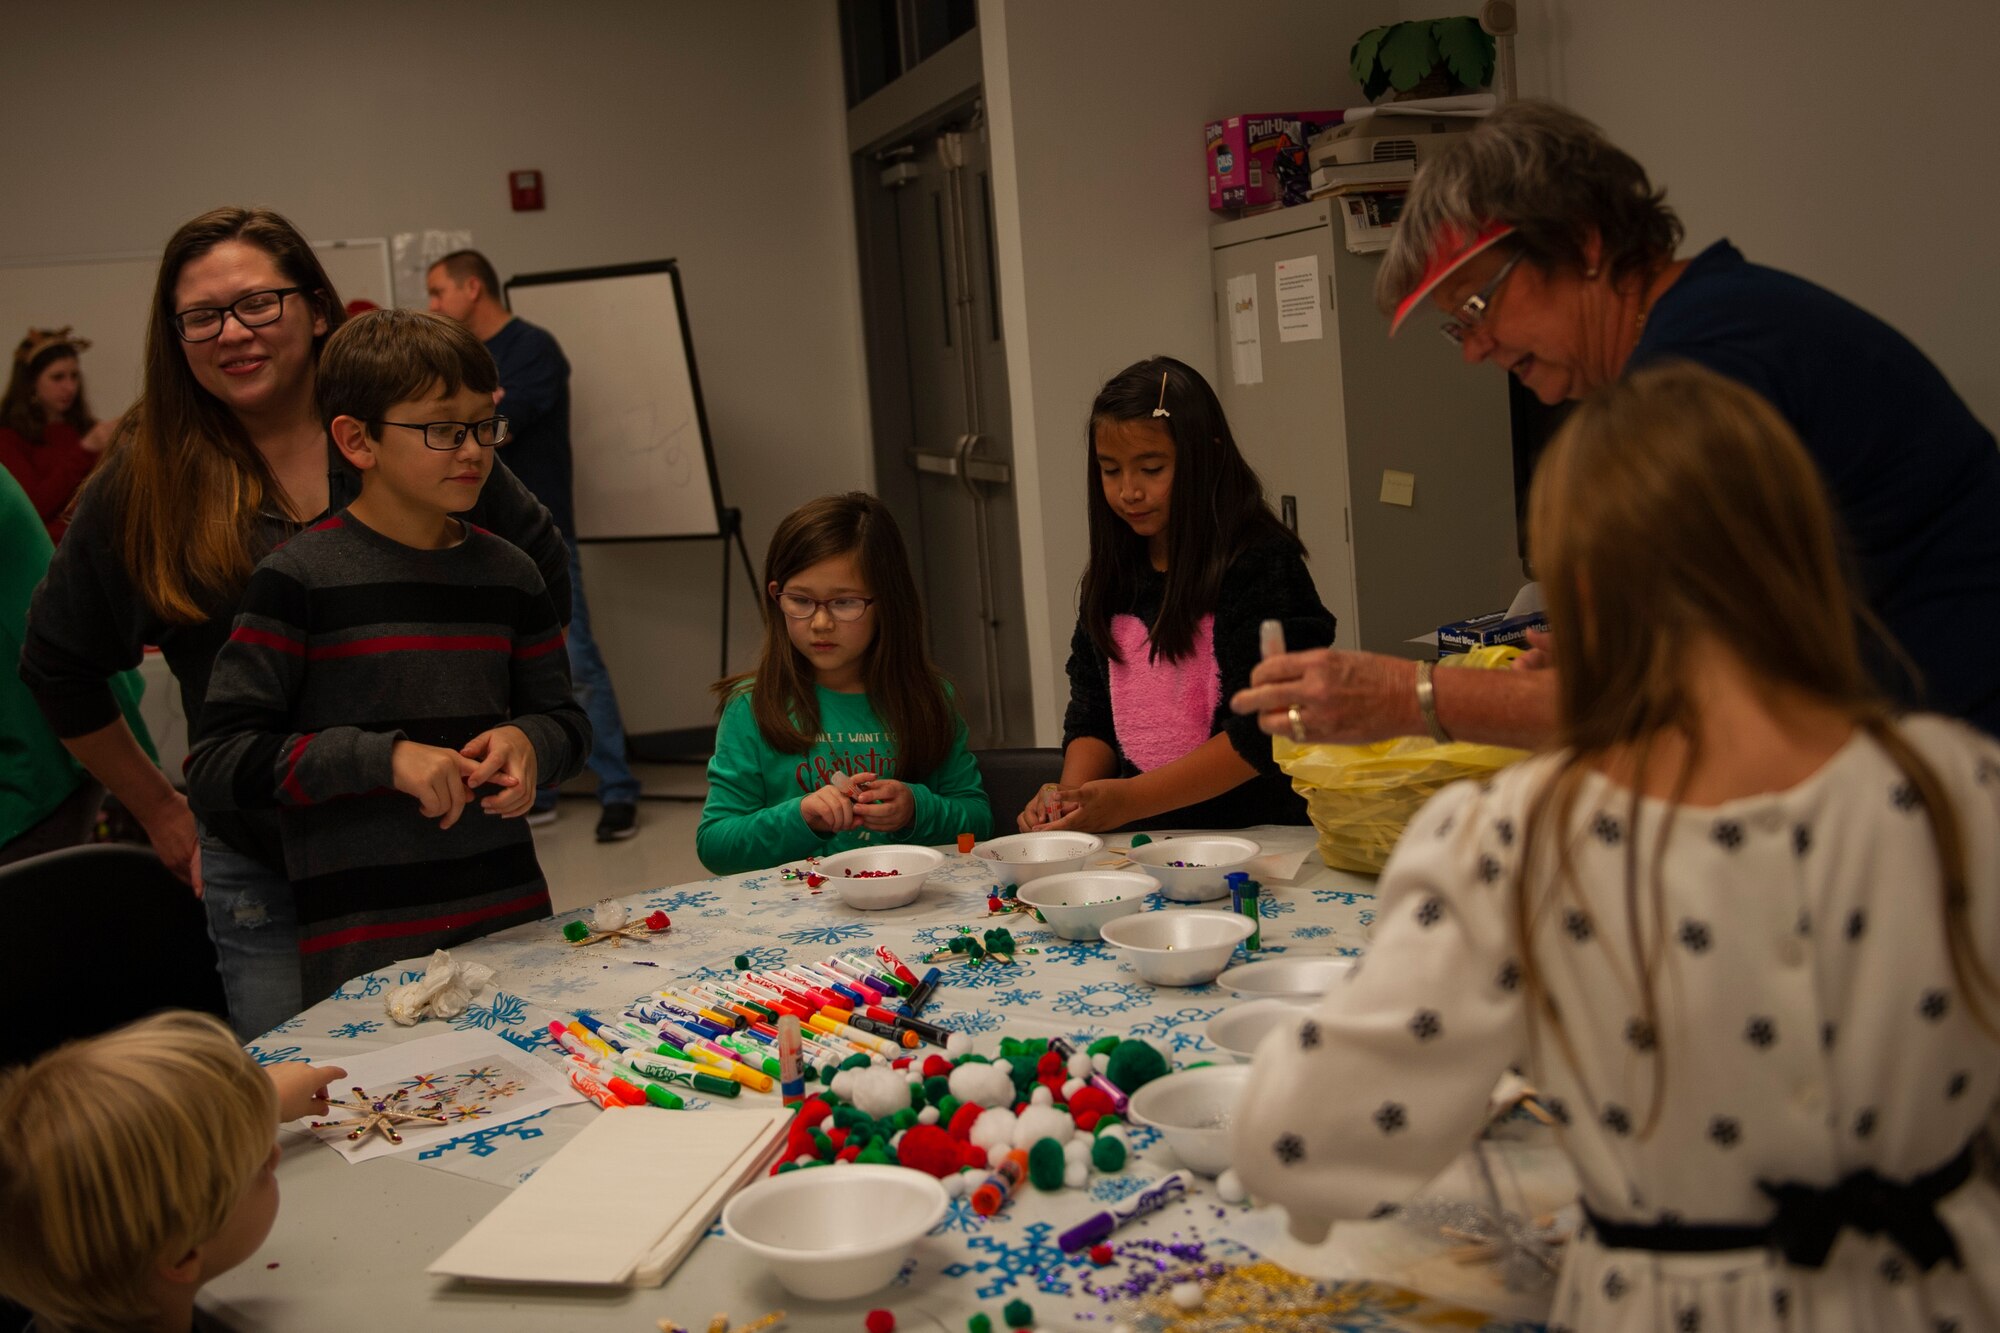 A photo of attendees doing arts and crafts